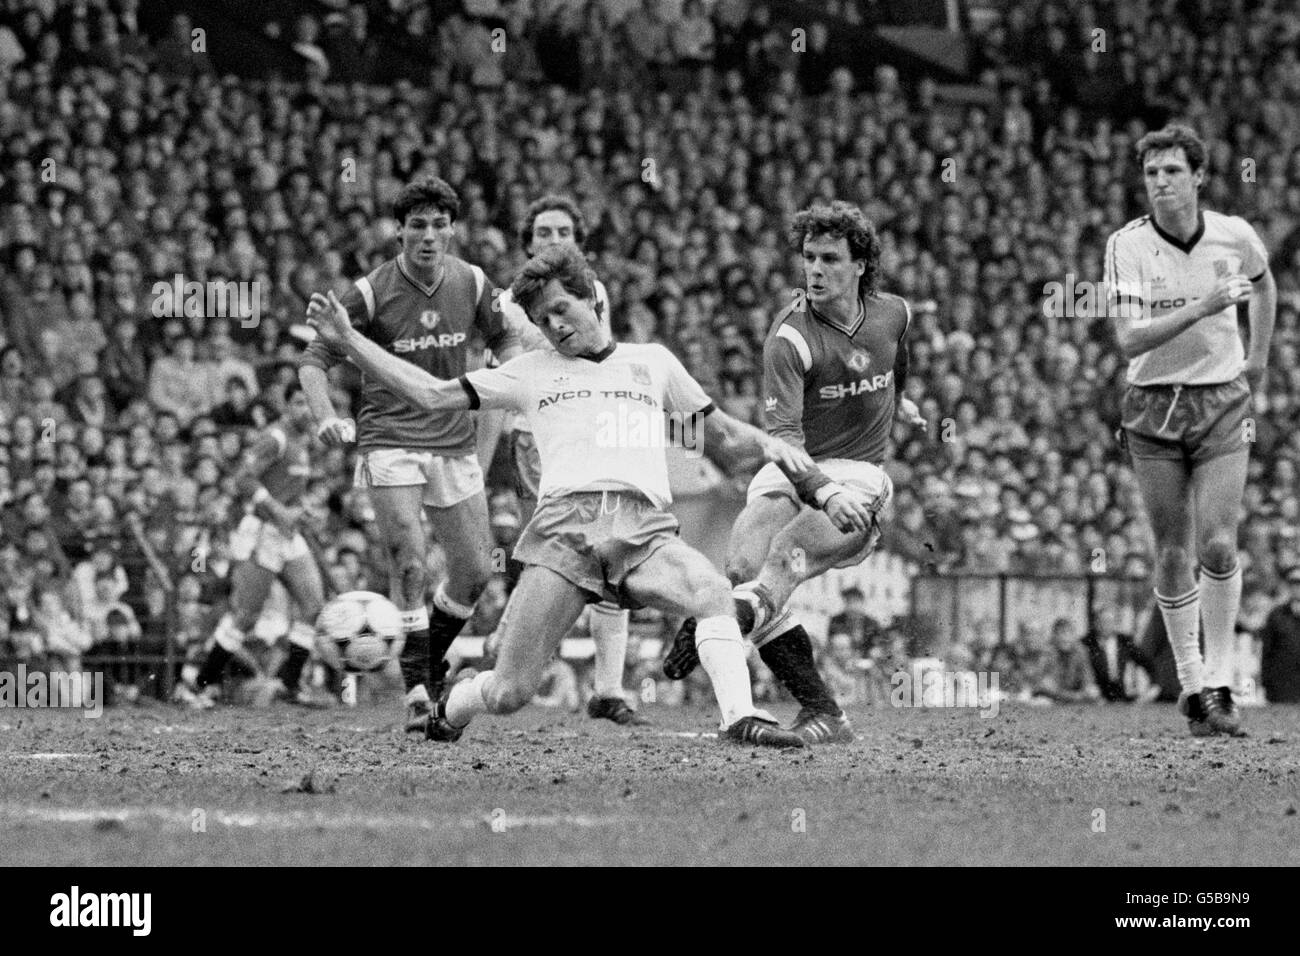 Manchester United's striker Mark Hughes (right) blasts the ball home for United's first goal versus West ham at Old Trafford ground, Manchester. Team mate Frank Stapleton watches. Stock Photo